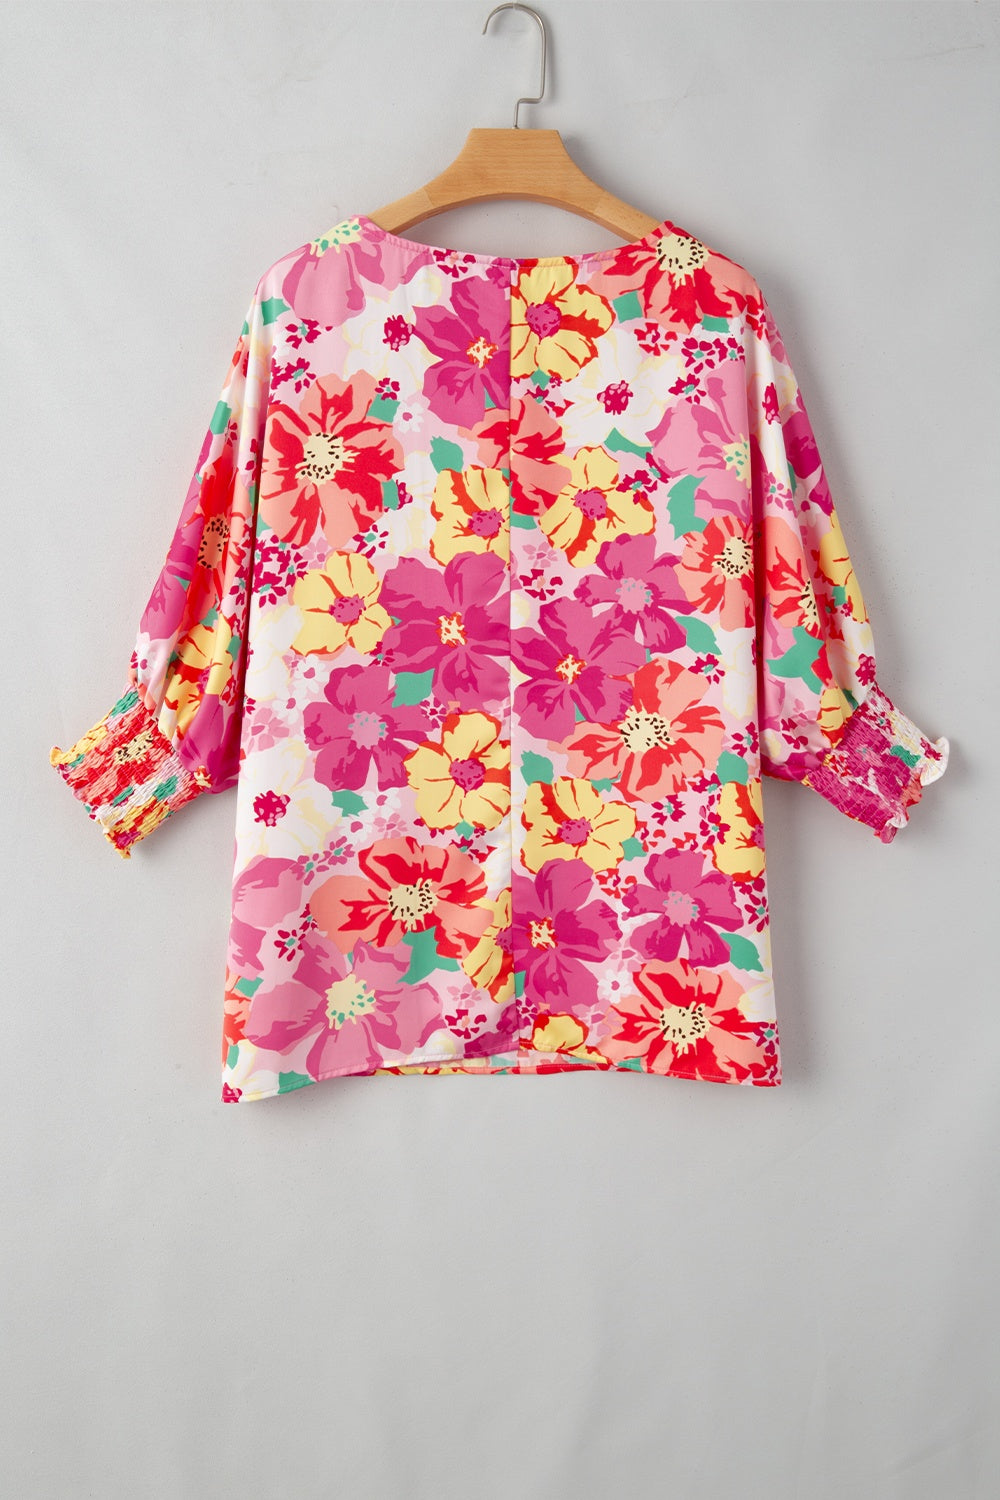 Cool Summer Floral Top